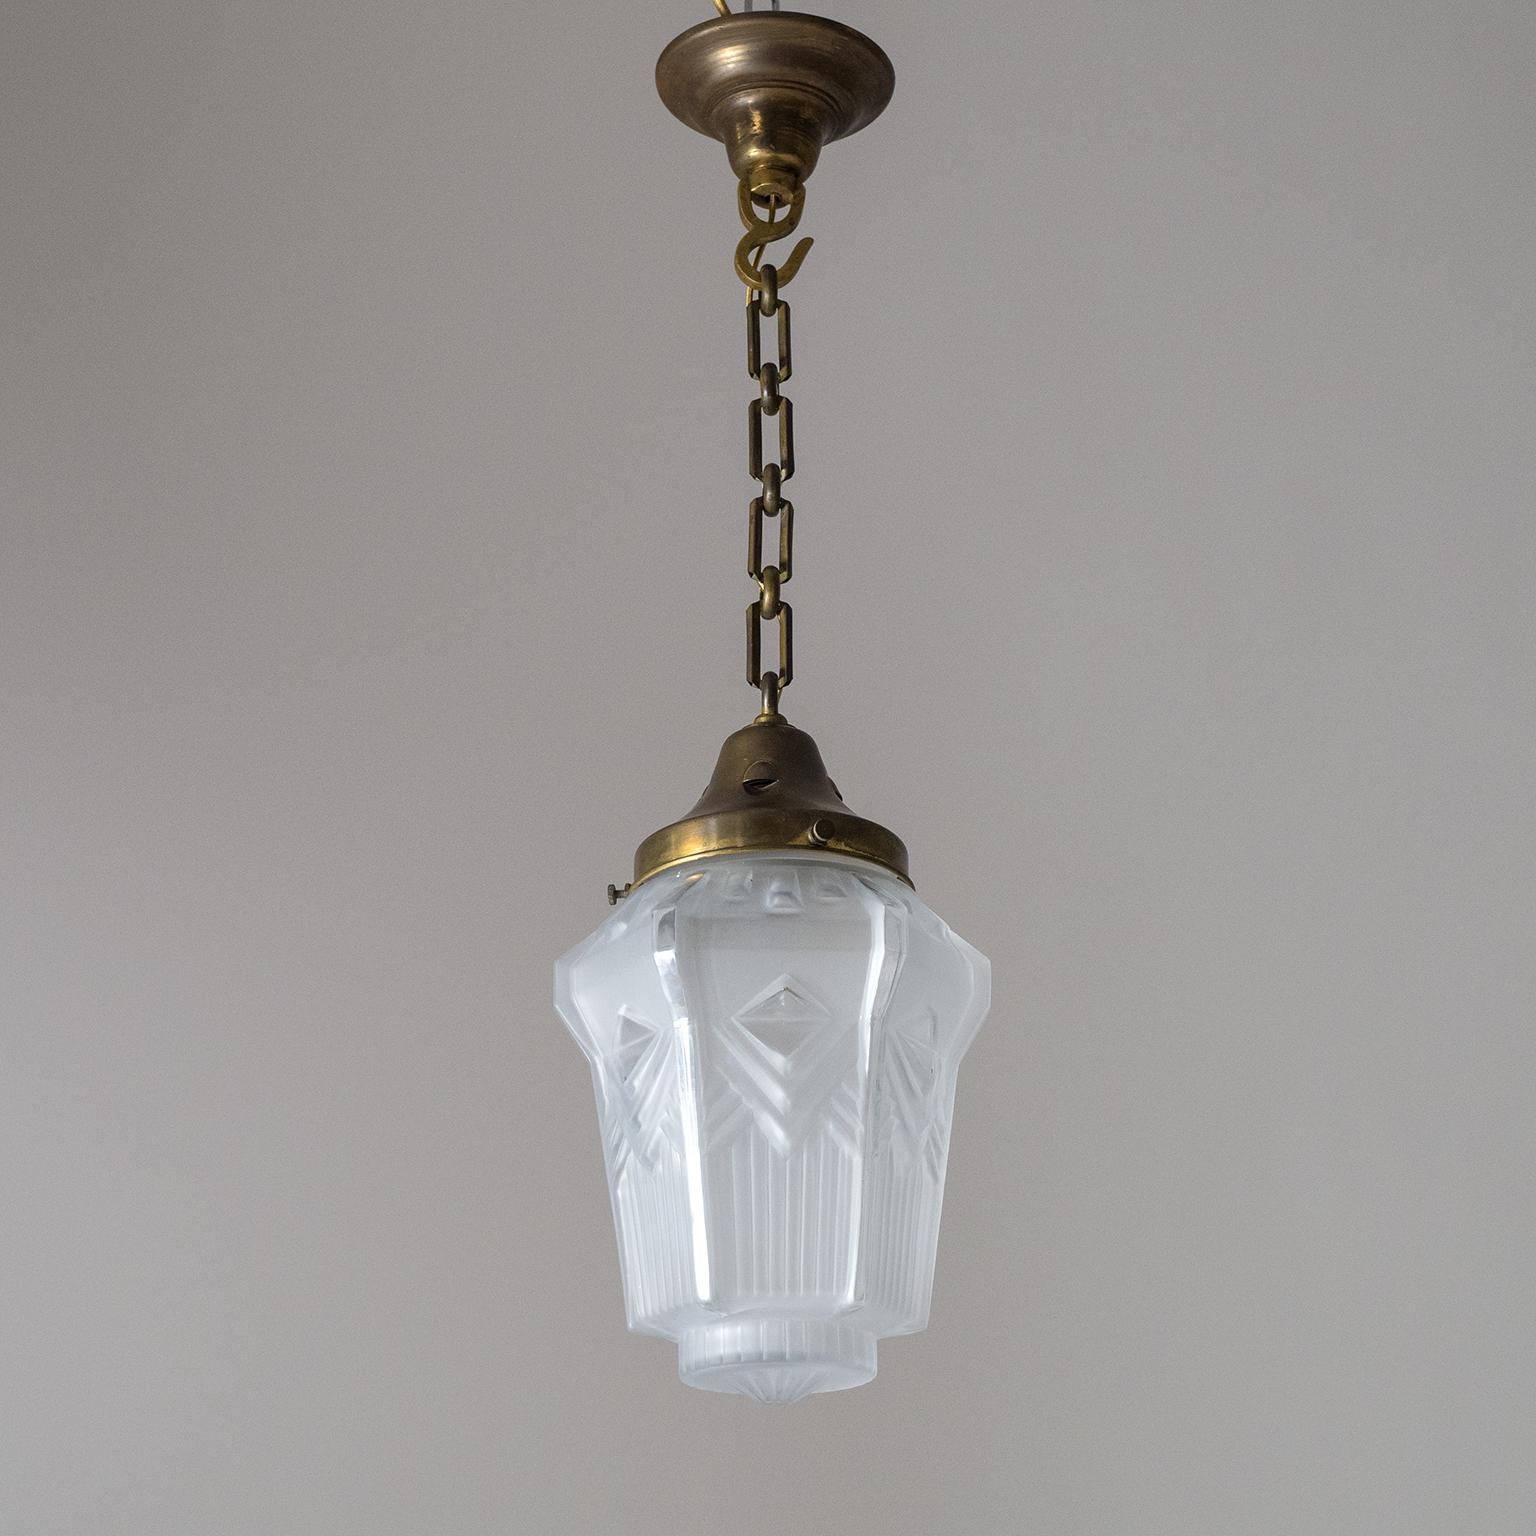 Fine French Art Deco glass and brass pendant from the 1920s. The hexagonal glass diffuser with intricate geometric and streamline patterns and texture is frosted on the outside with clear polished accents. The hardware is entirely in brass. One old